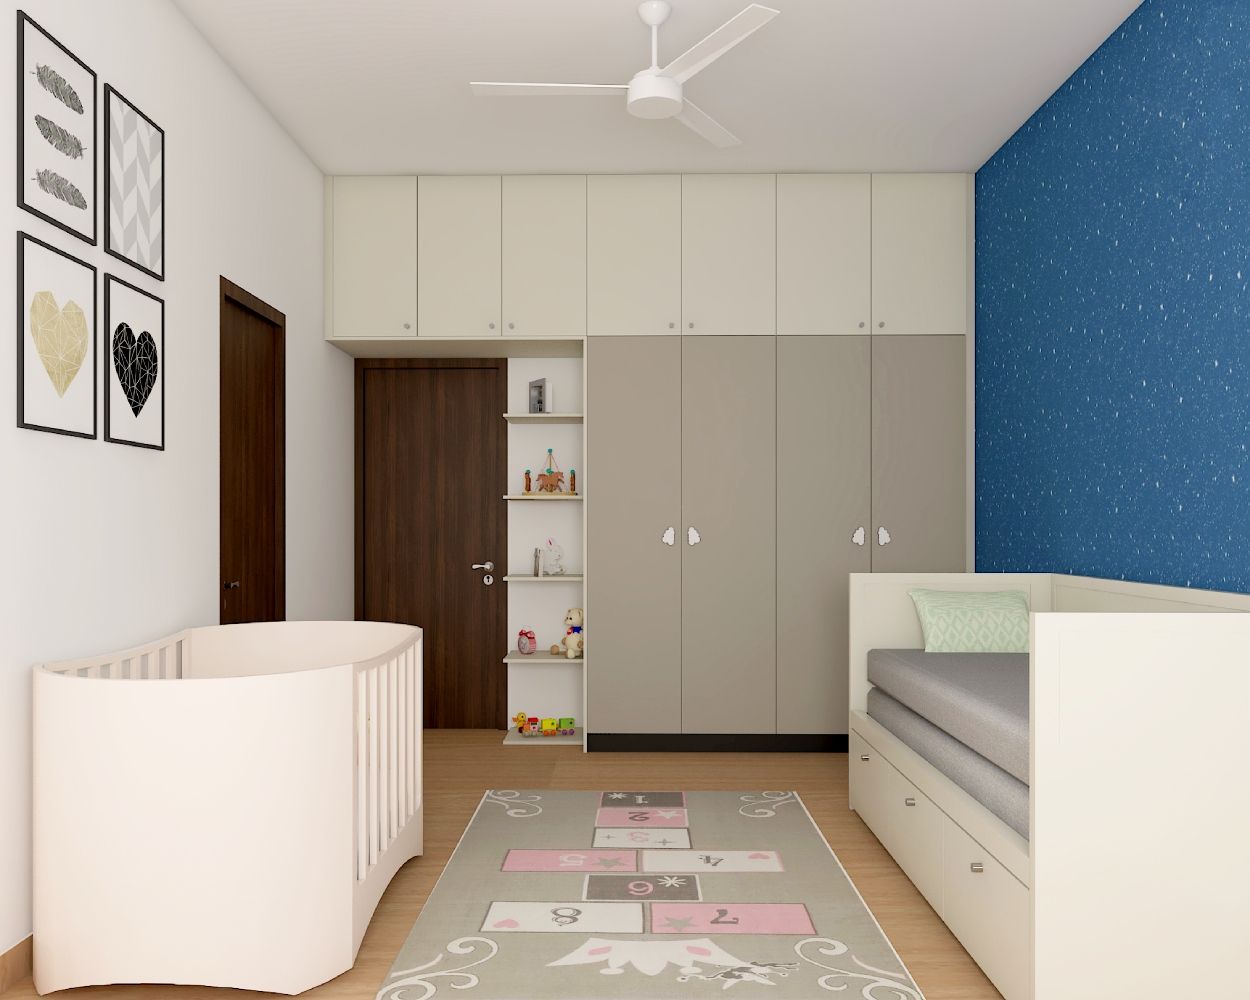 Modern Kids Bedroom Design With White Sofa-Cum-Bed And Blue Patterned Wallpaper